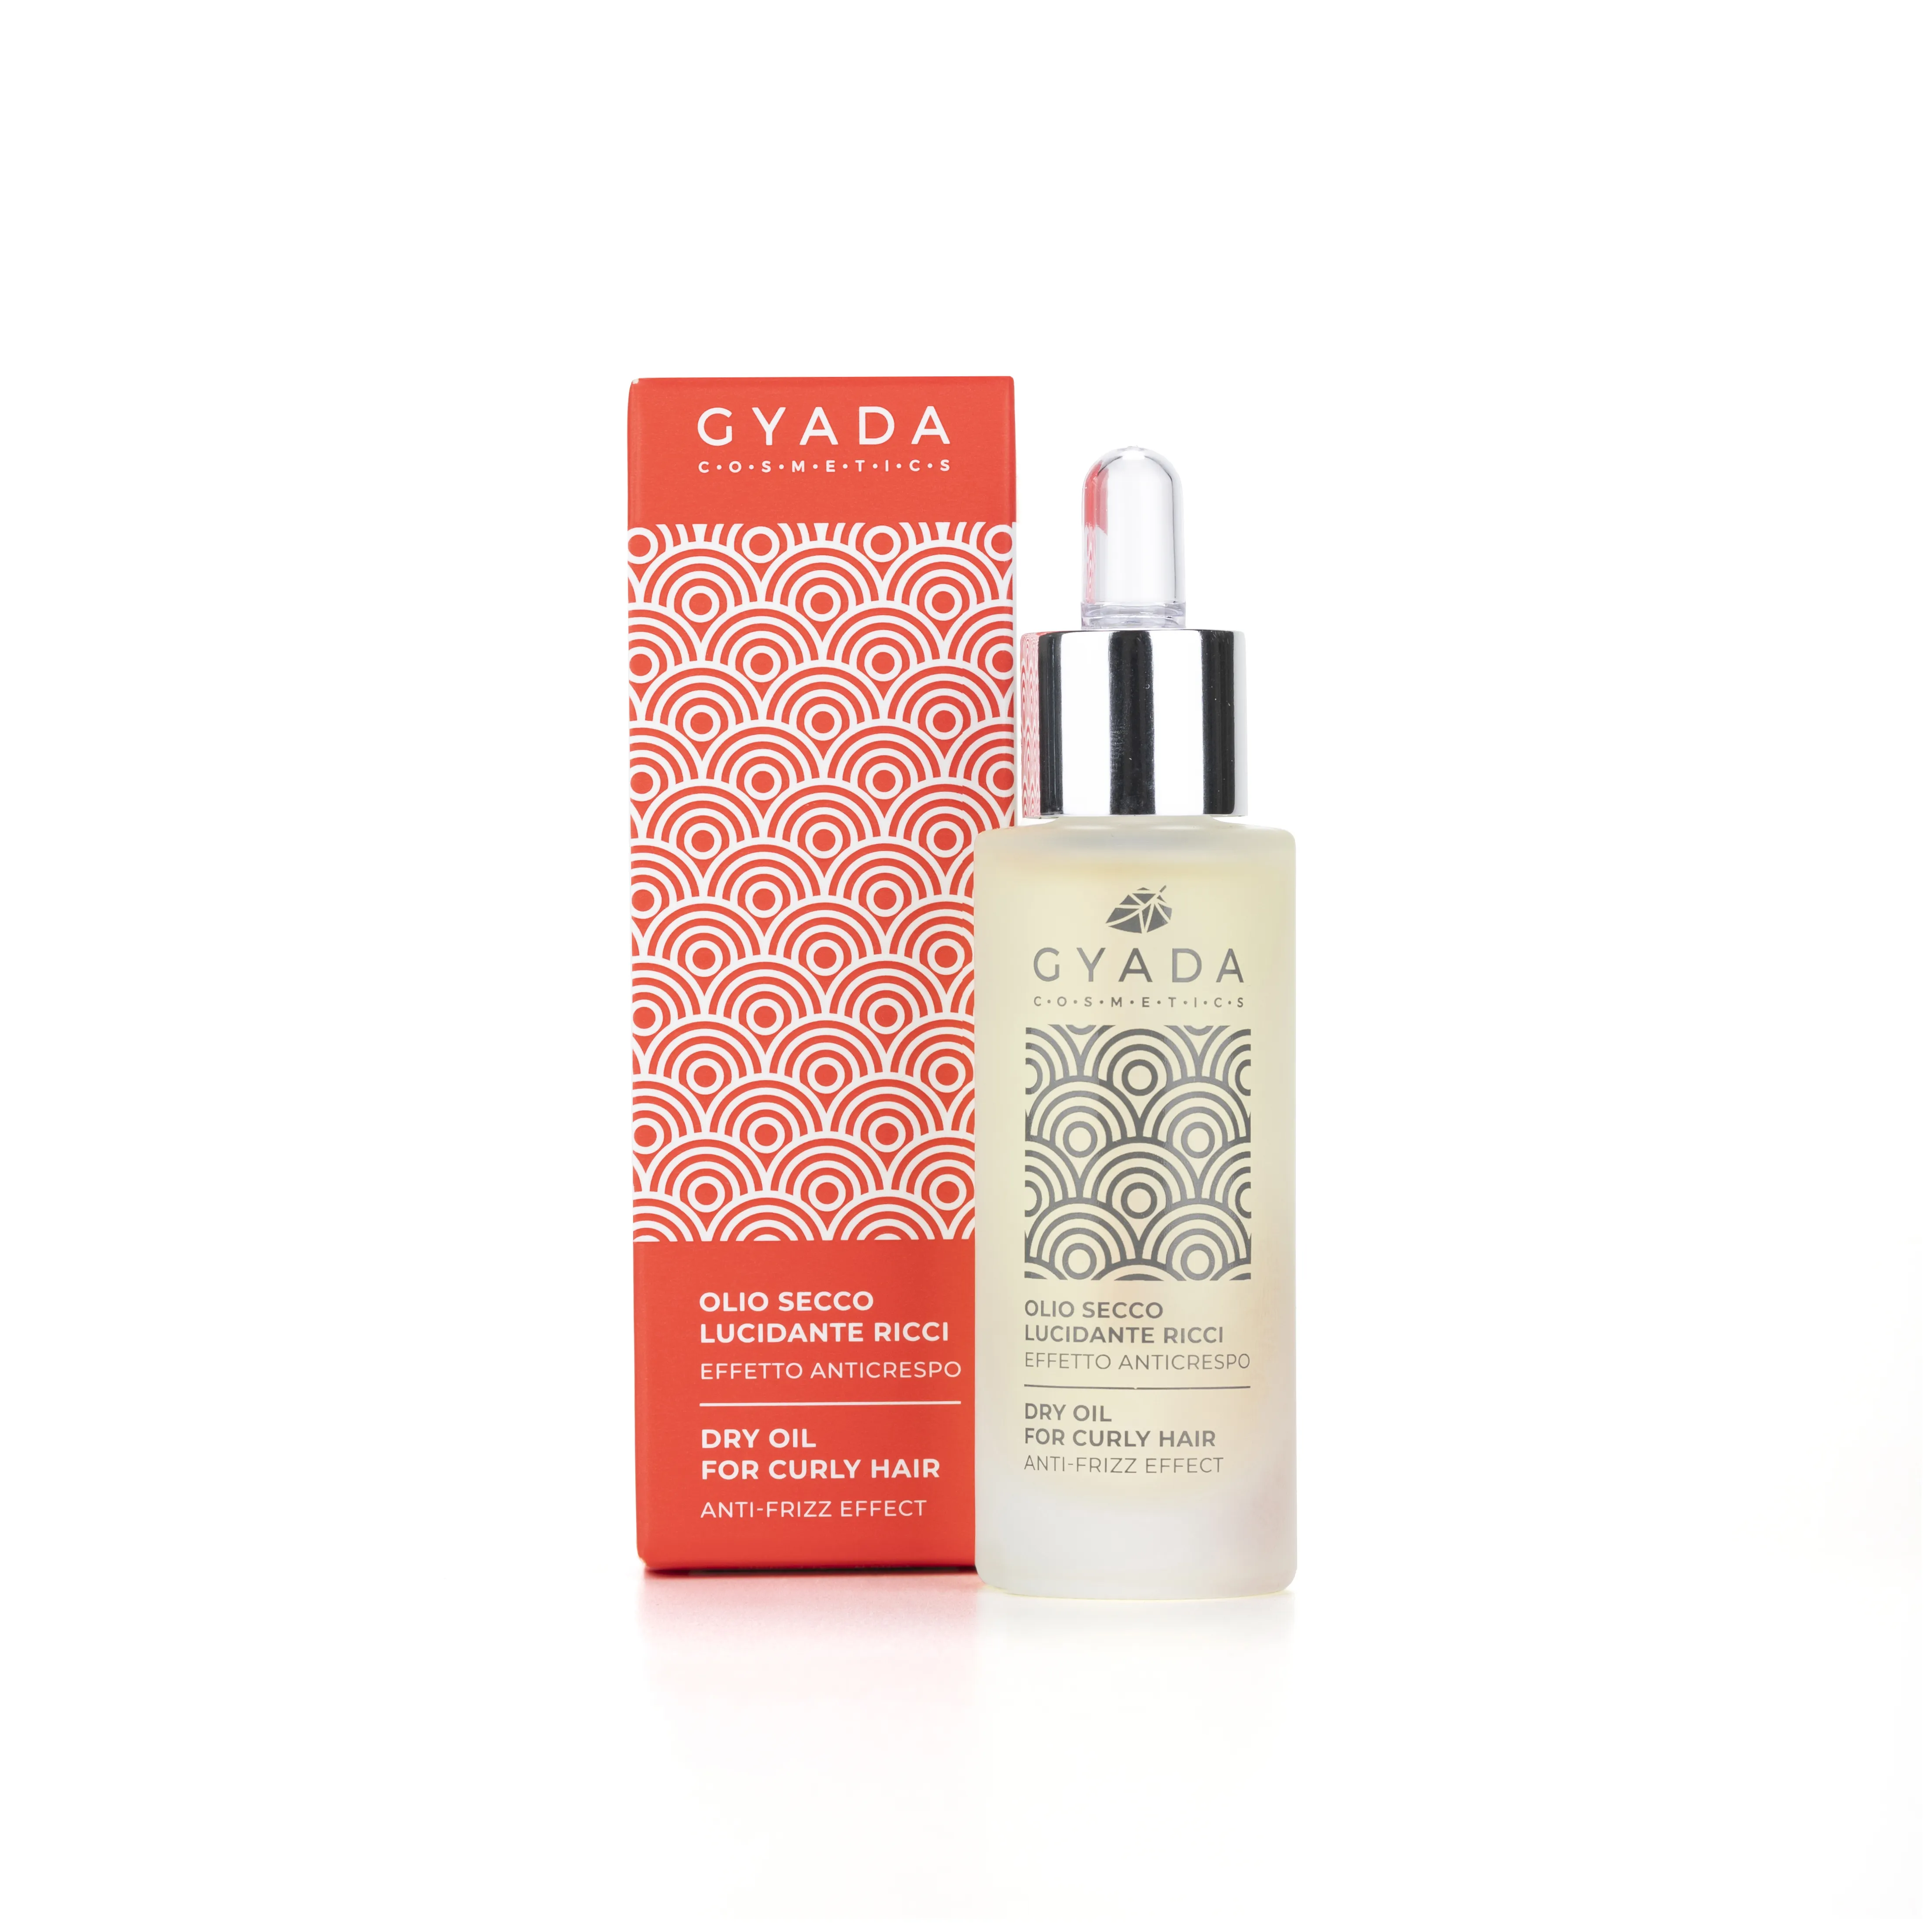 exclusively natural GYADA Dry Oil for Curly italy anti frizz hair care 30ml oil 100% pure serum